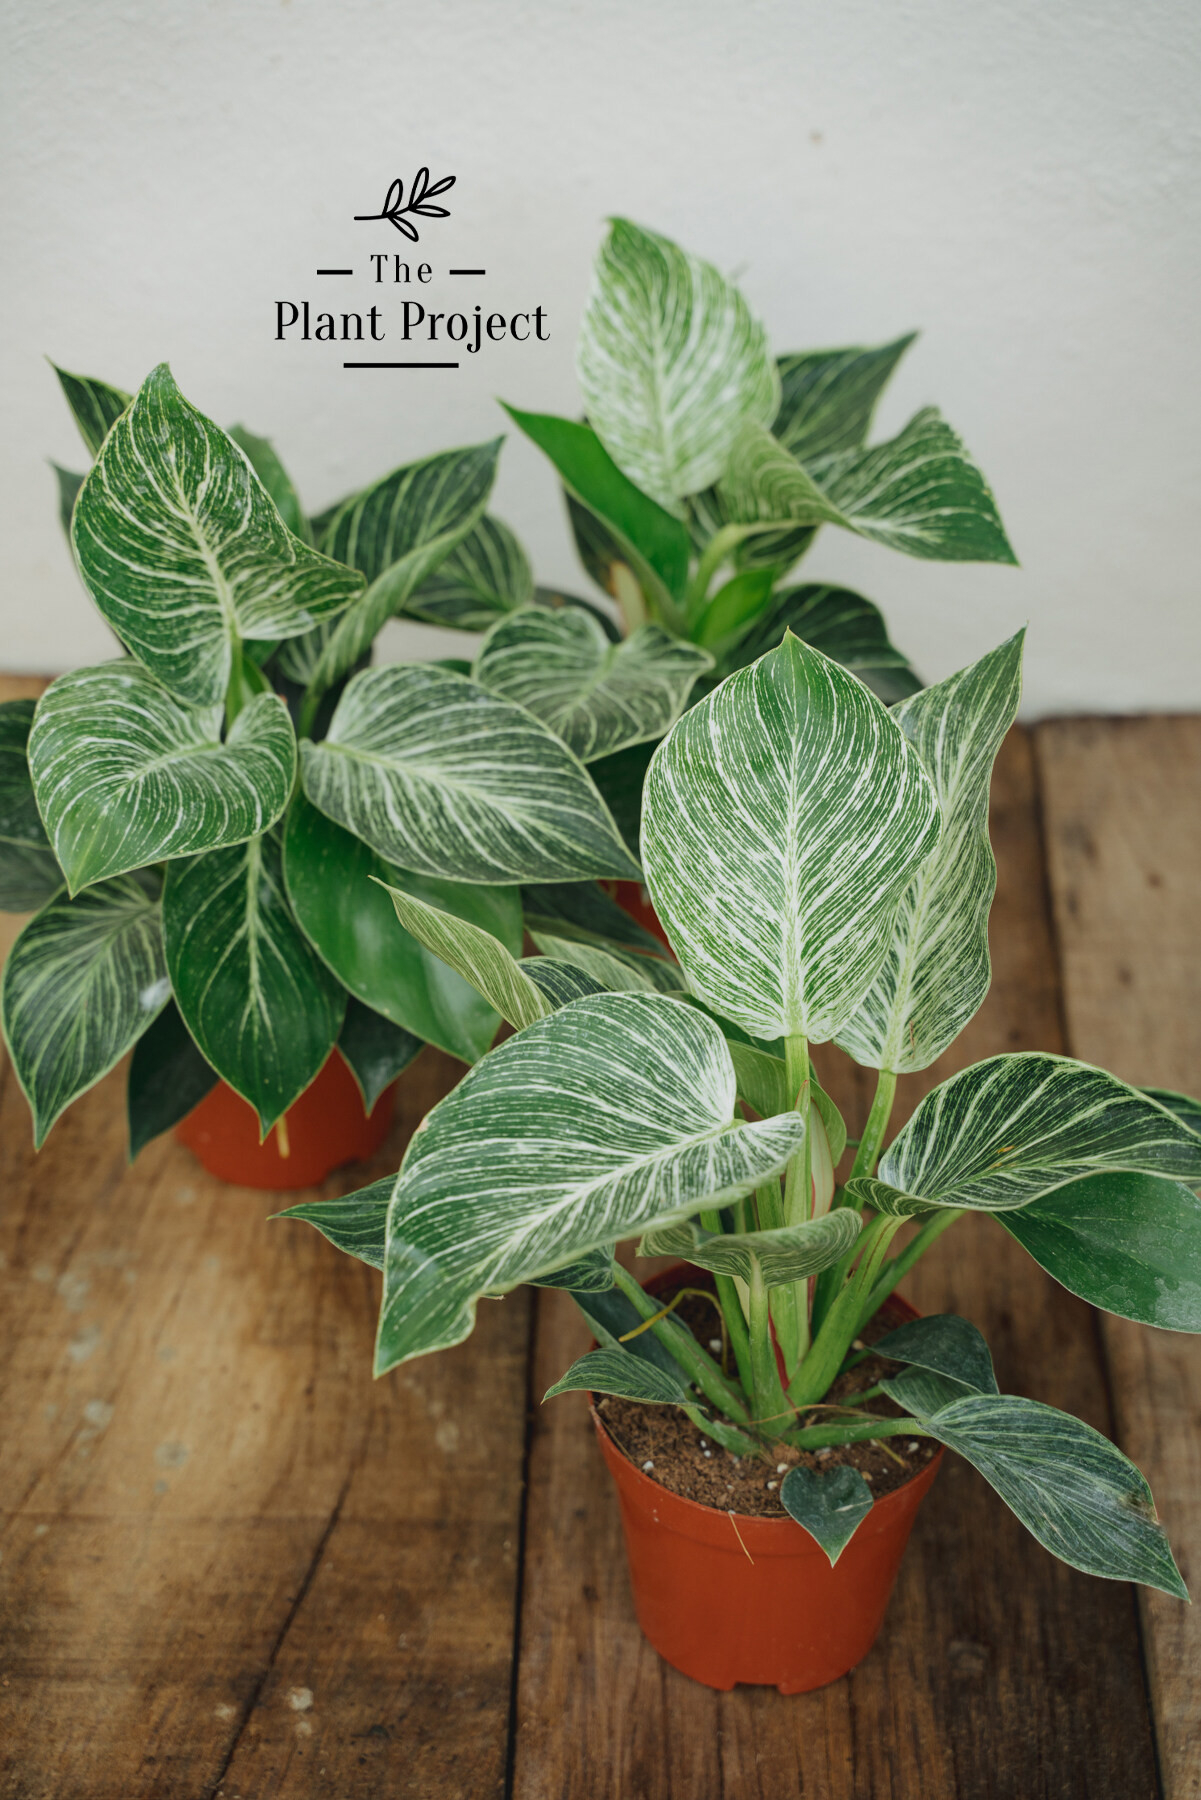 The Plant Project Live Plant Philodendron Birkin 蔓绿绒 | Lazada